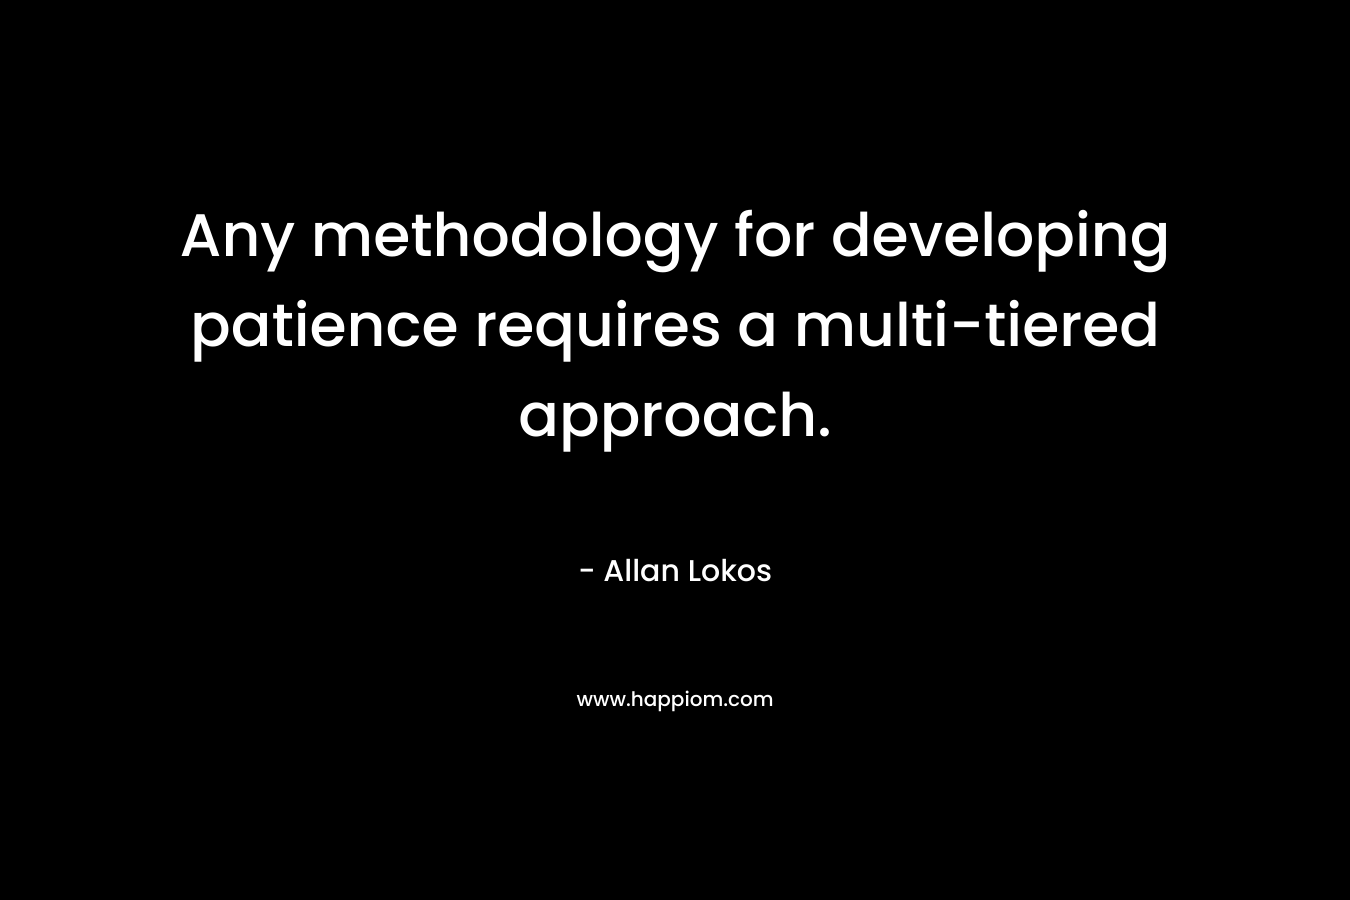 Any methodology for developing patience requires a multi-tiered approach.